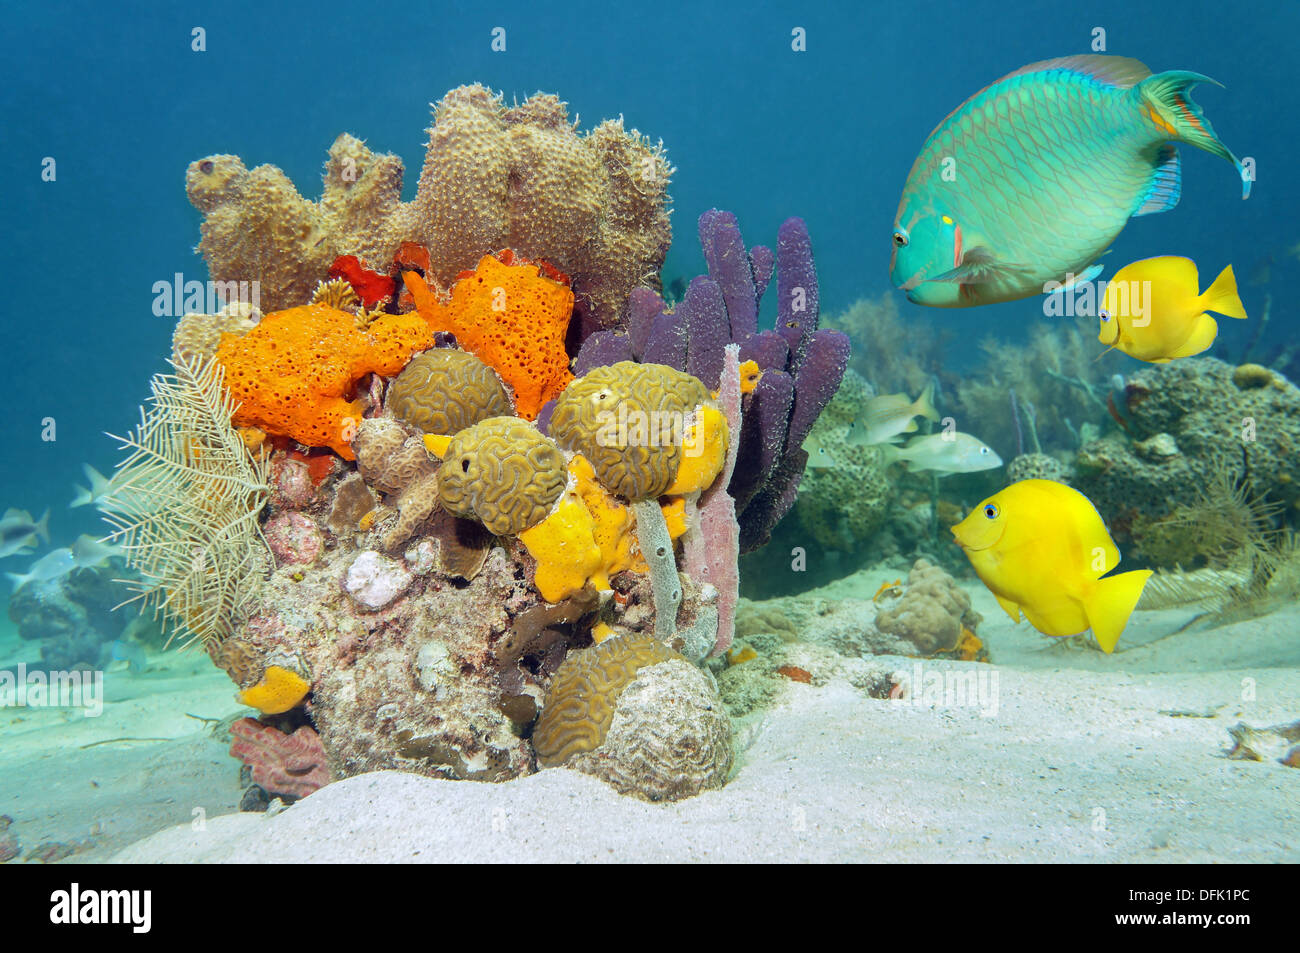 Colors of marine life underwater with tropical fish, coral and sea sponges, Atlantic ocean Stock Photo